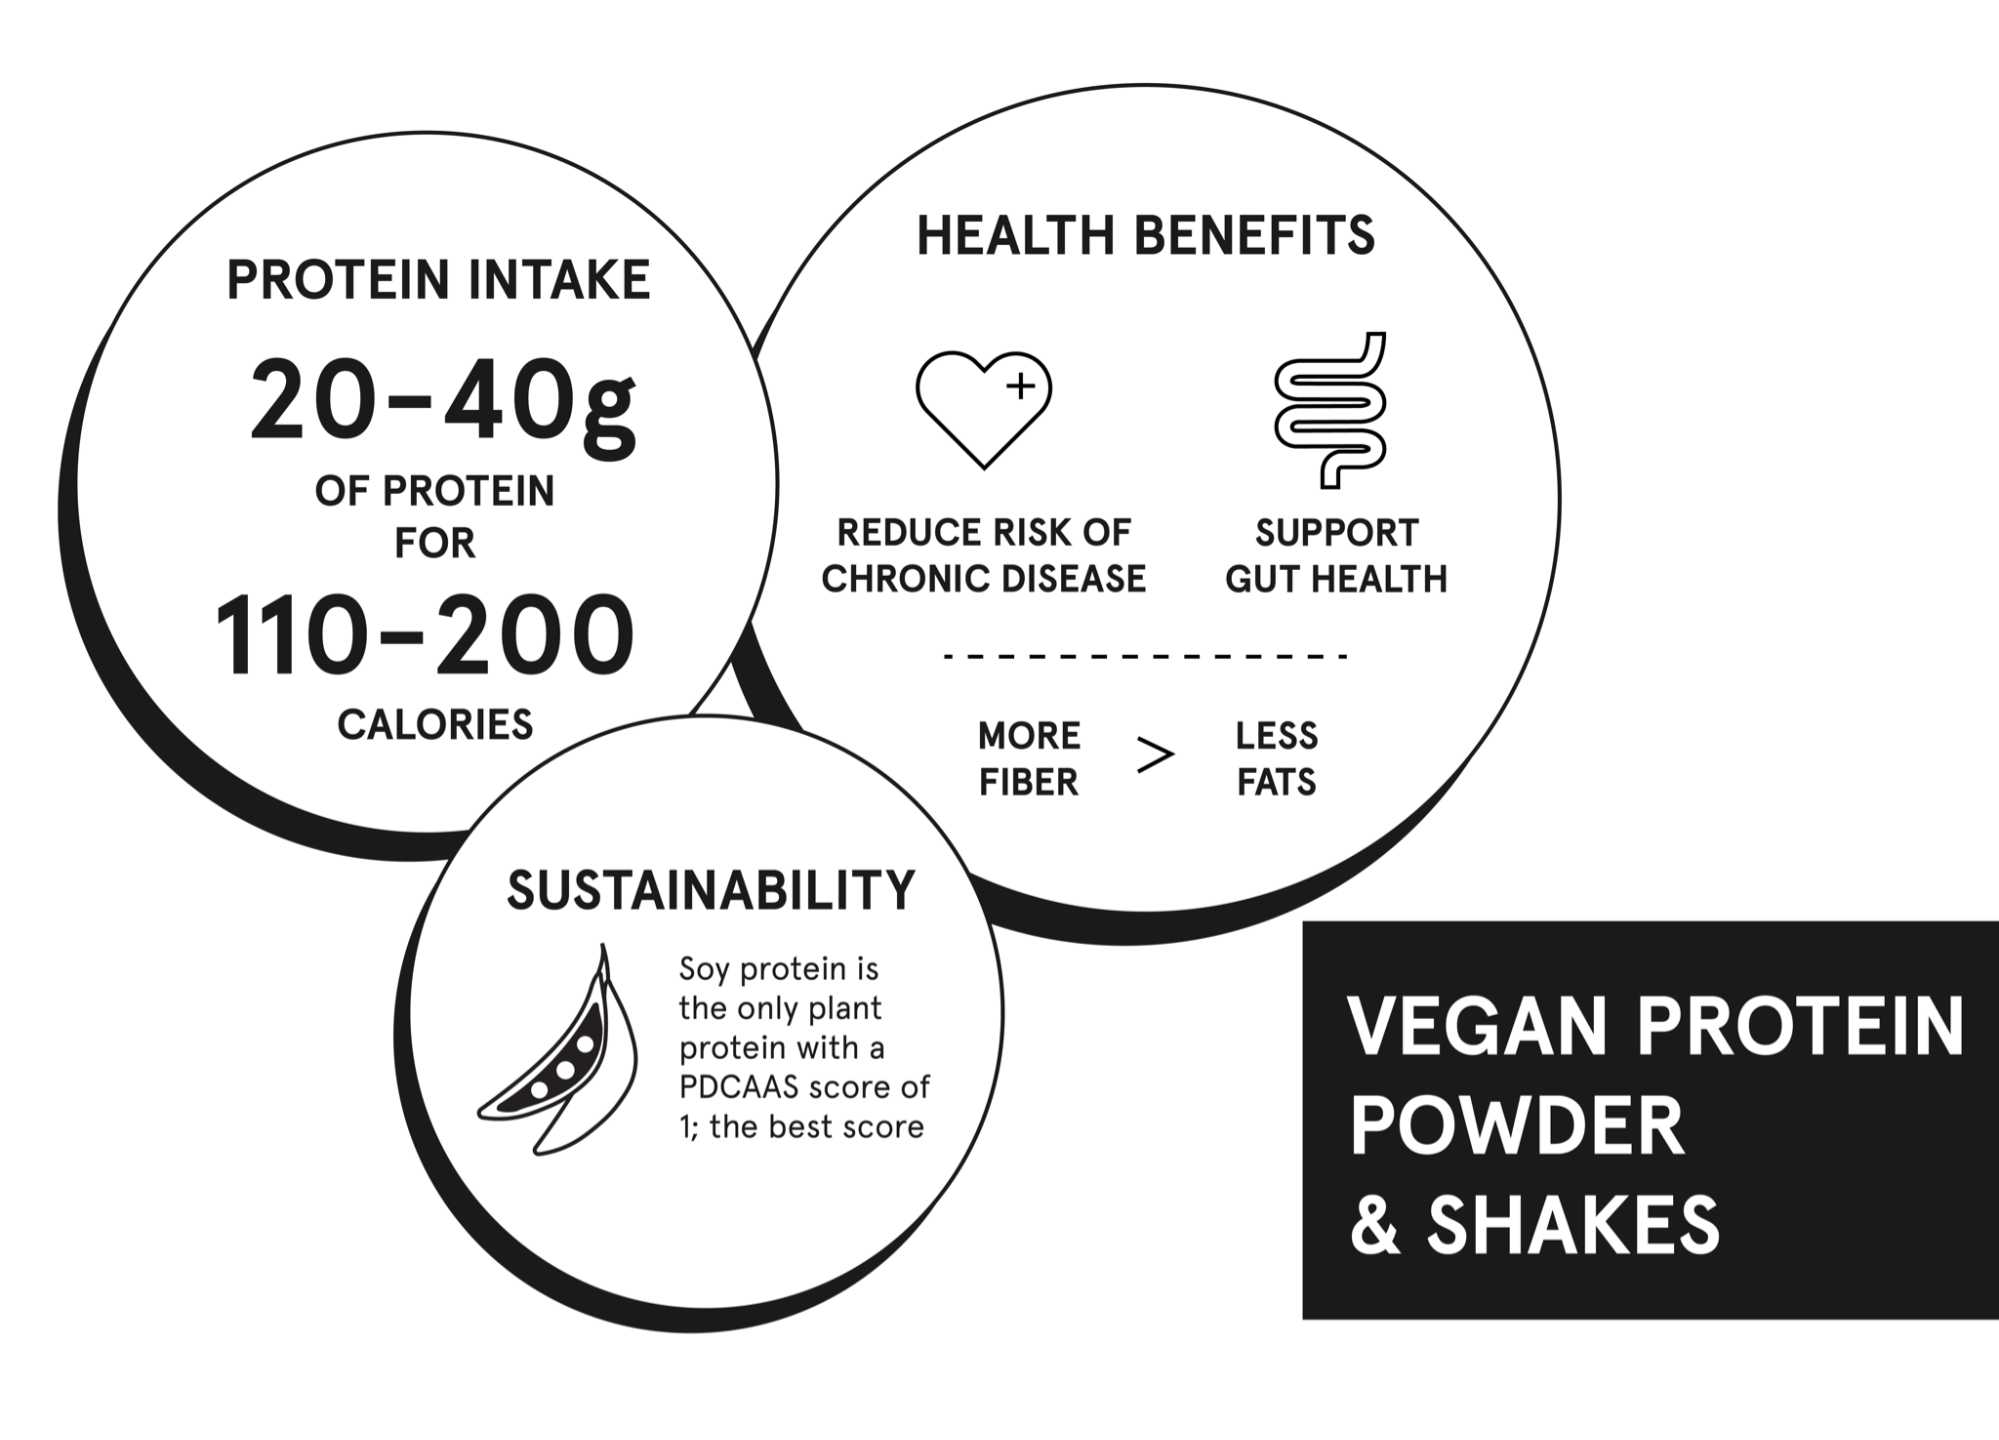 Vegan Protein Powder and Shakes infographic by Soylent